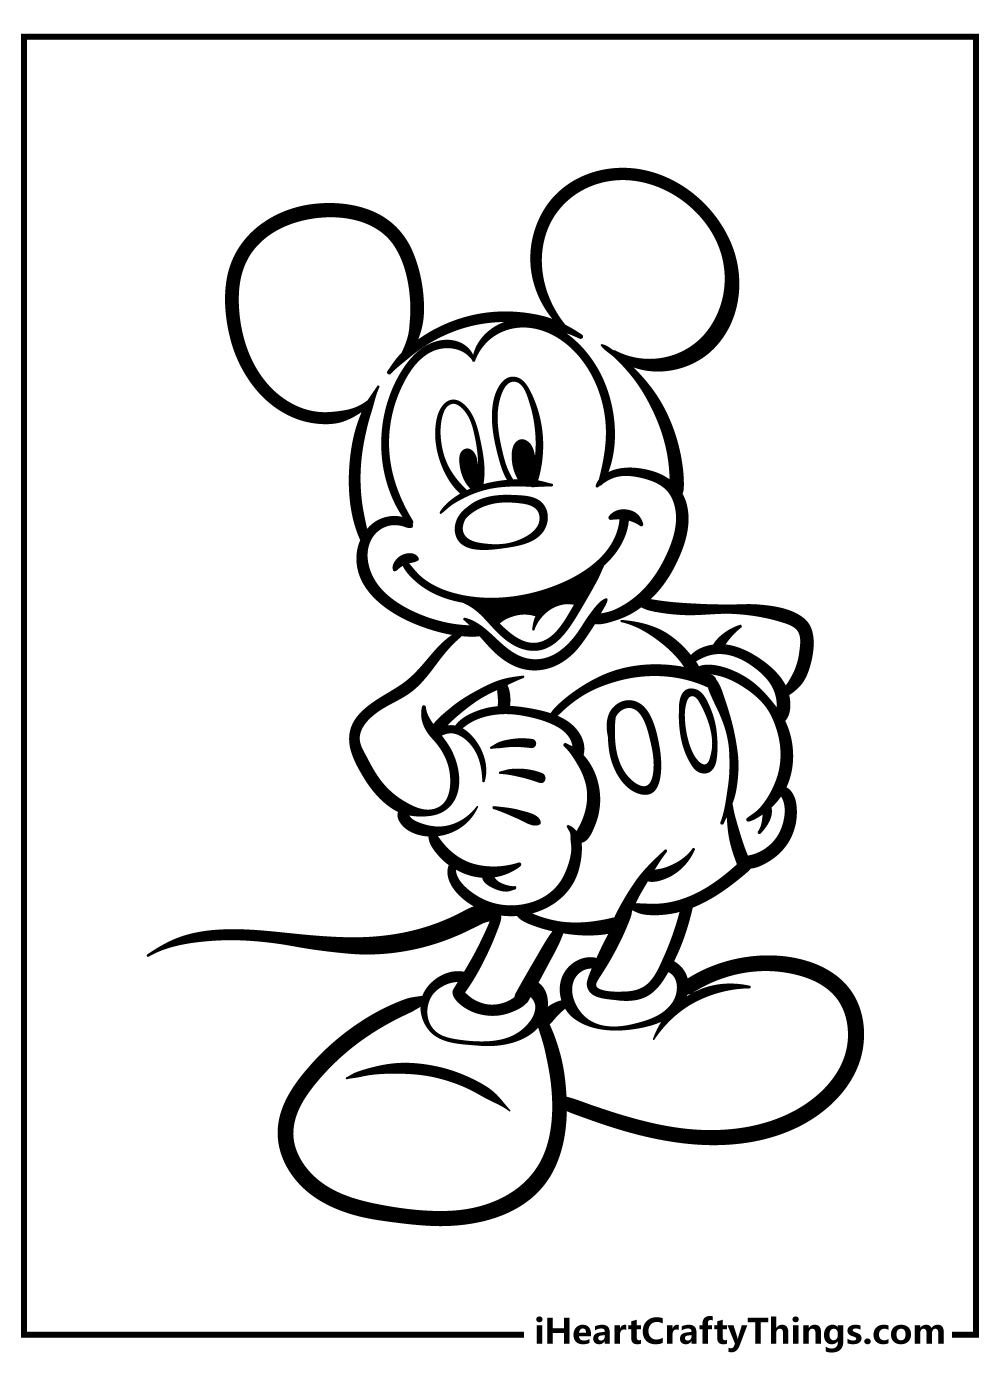 Mickey Mouse Coloring Pages for preschoolers free printable